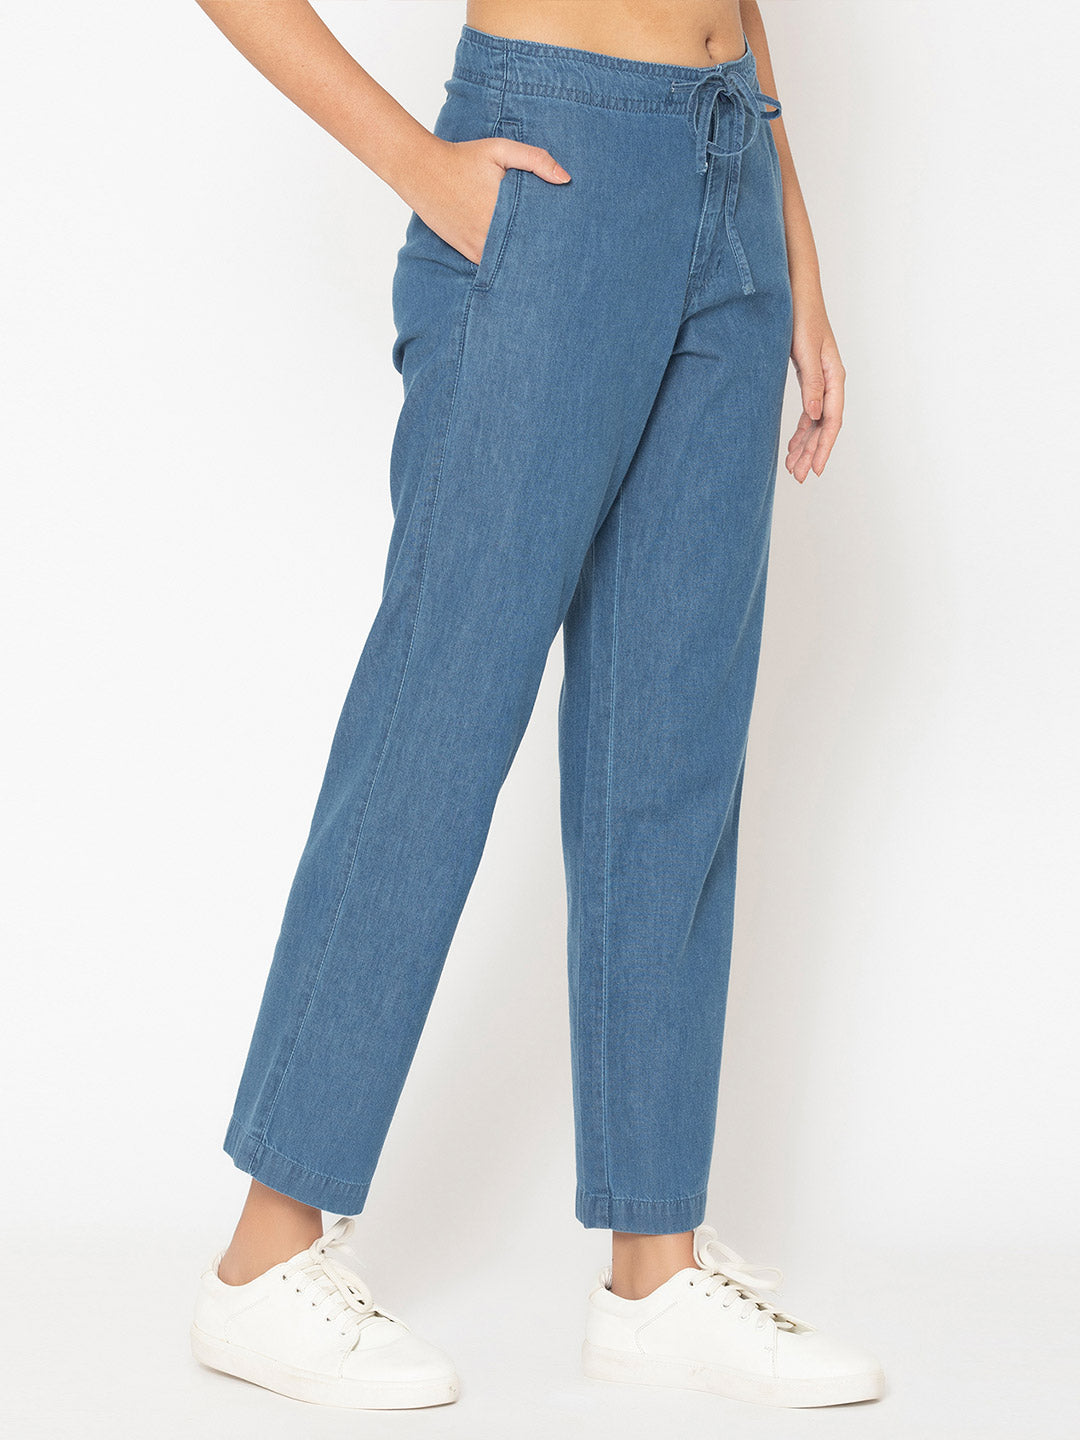 Beverley Jeans from Shaye , for women